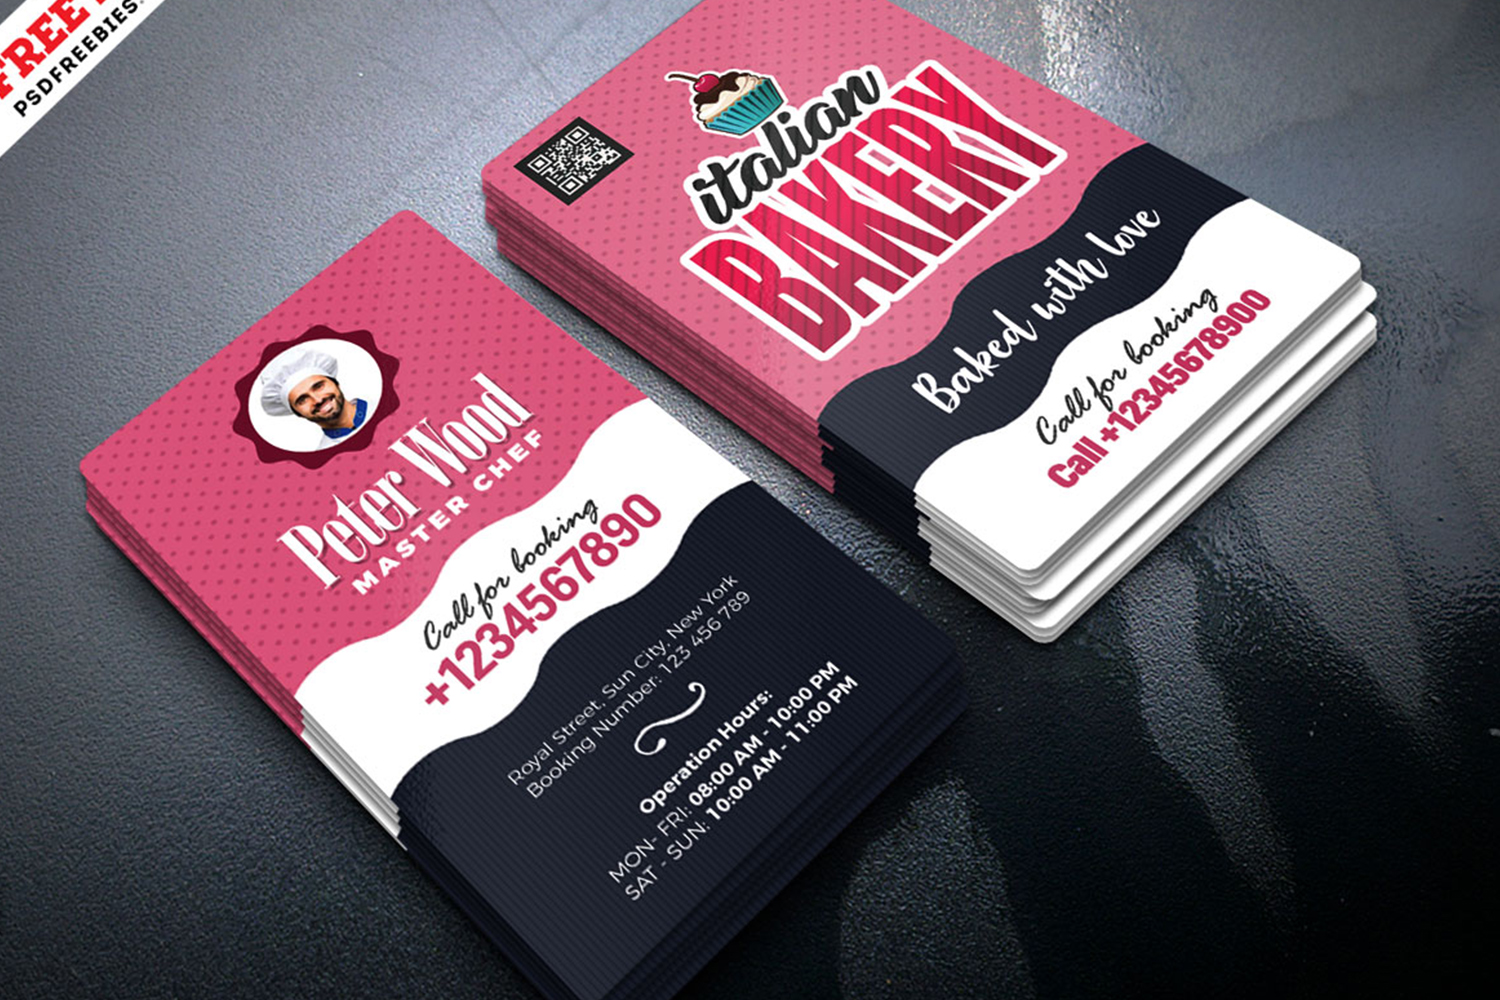 Bakery Shop Business Card PSD Free Download